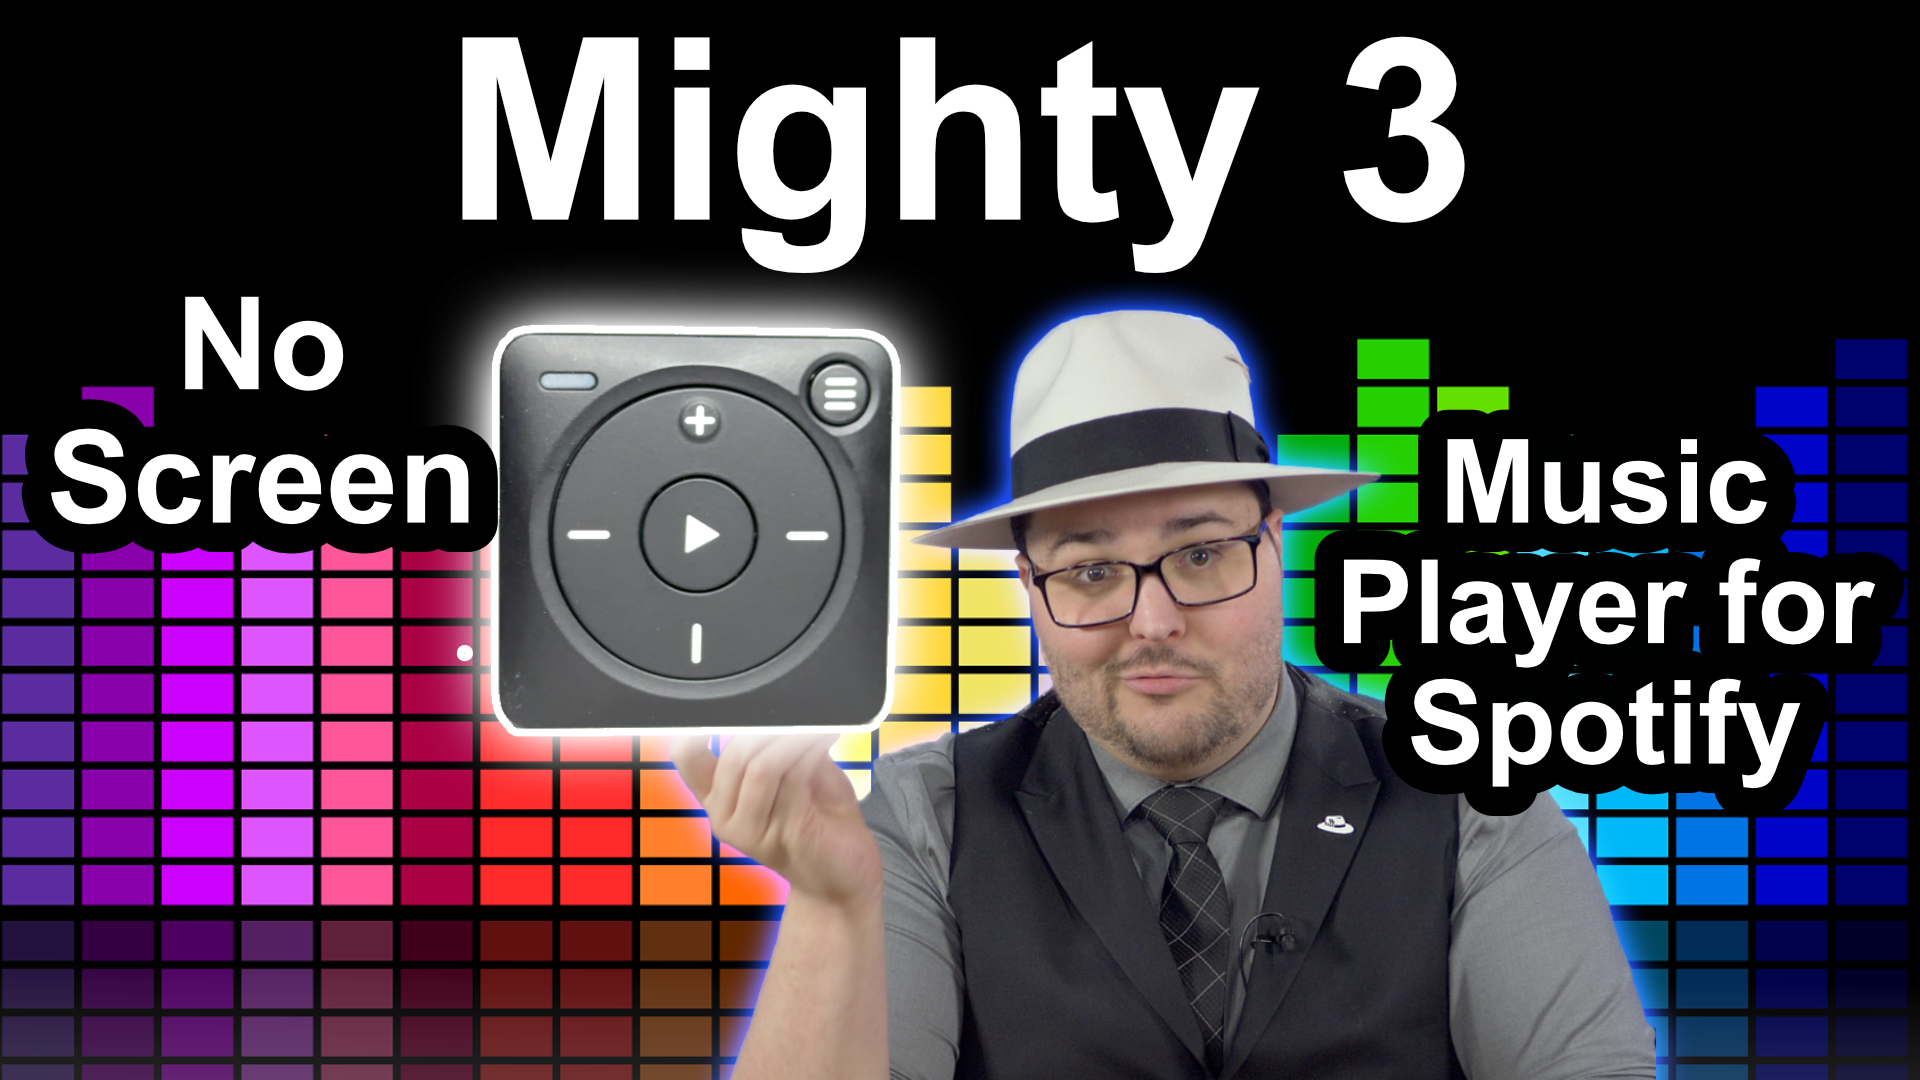 Mighty 3 No Screen Music Player